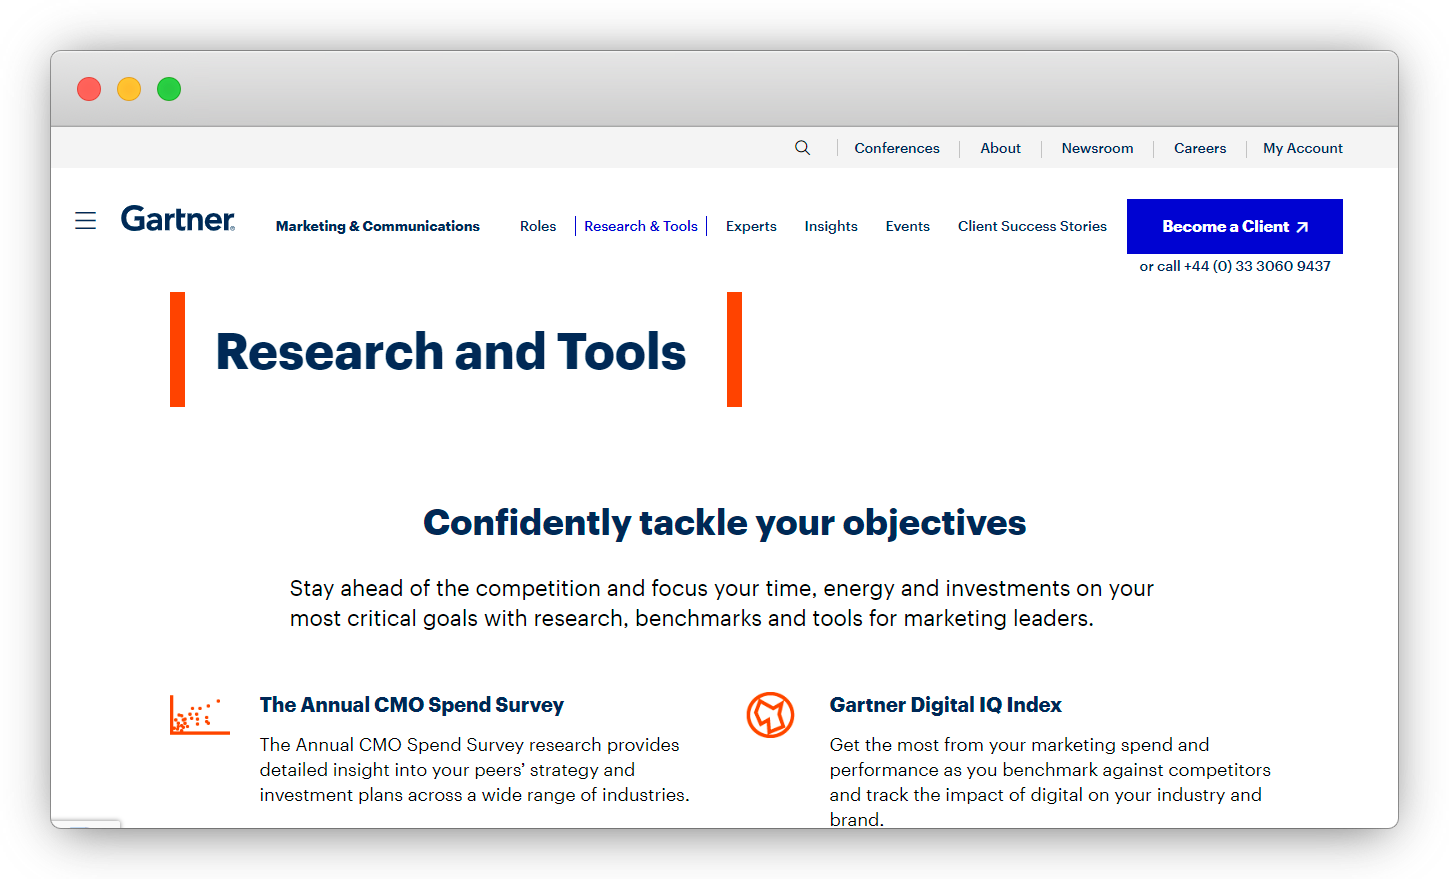 Gartner, Industry Analysis and Product Management tool